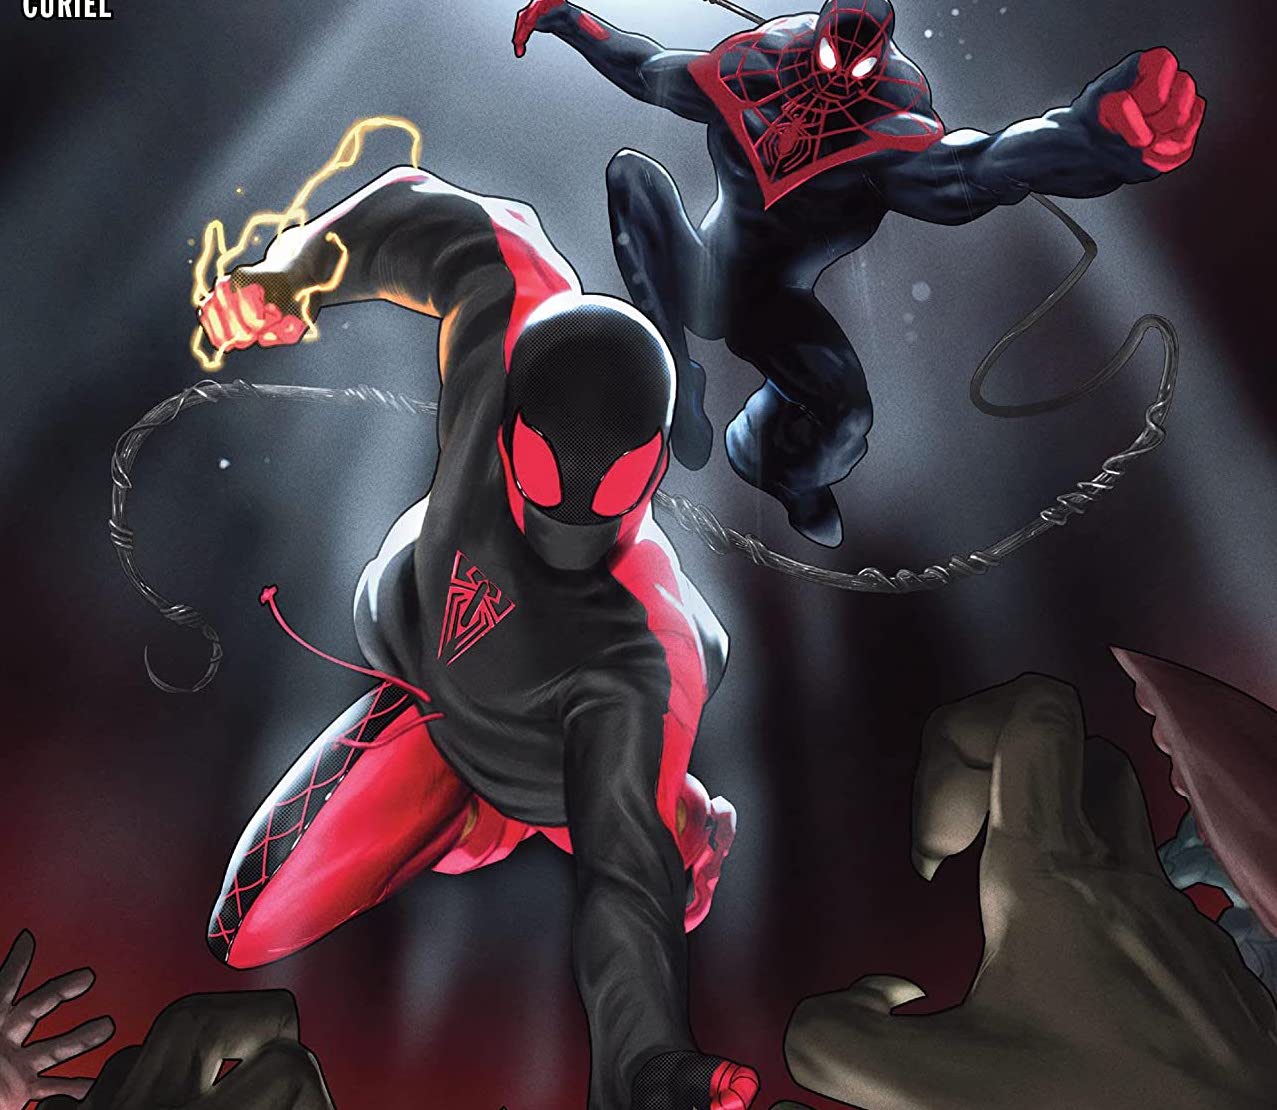 'Miles Morales: Spider-Man' #34 tests its heroes with intense action